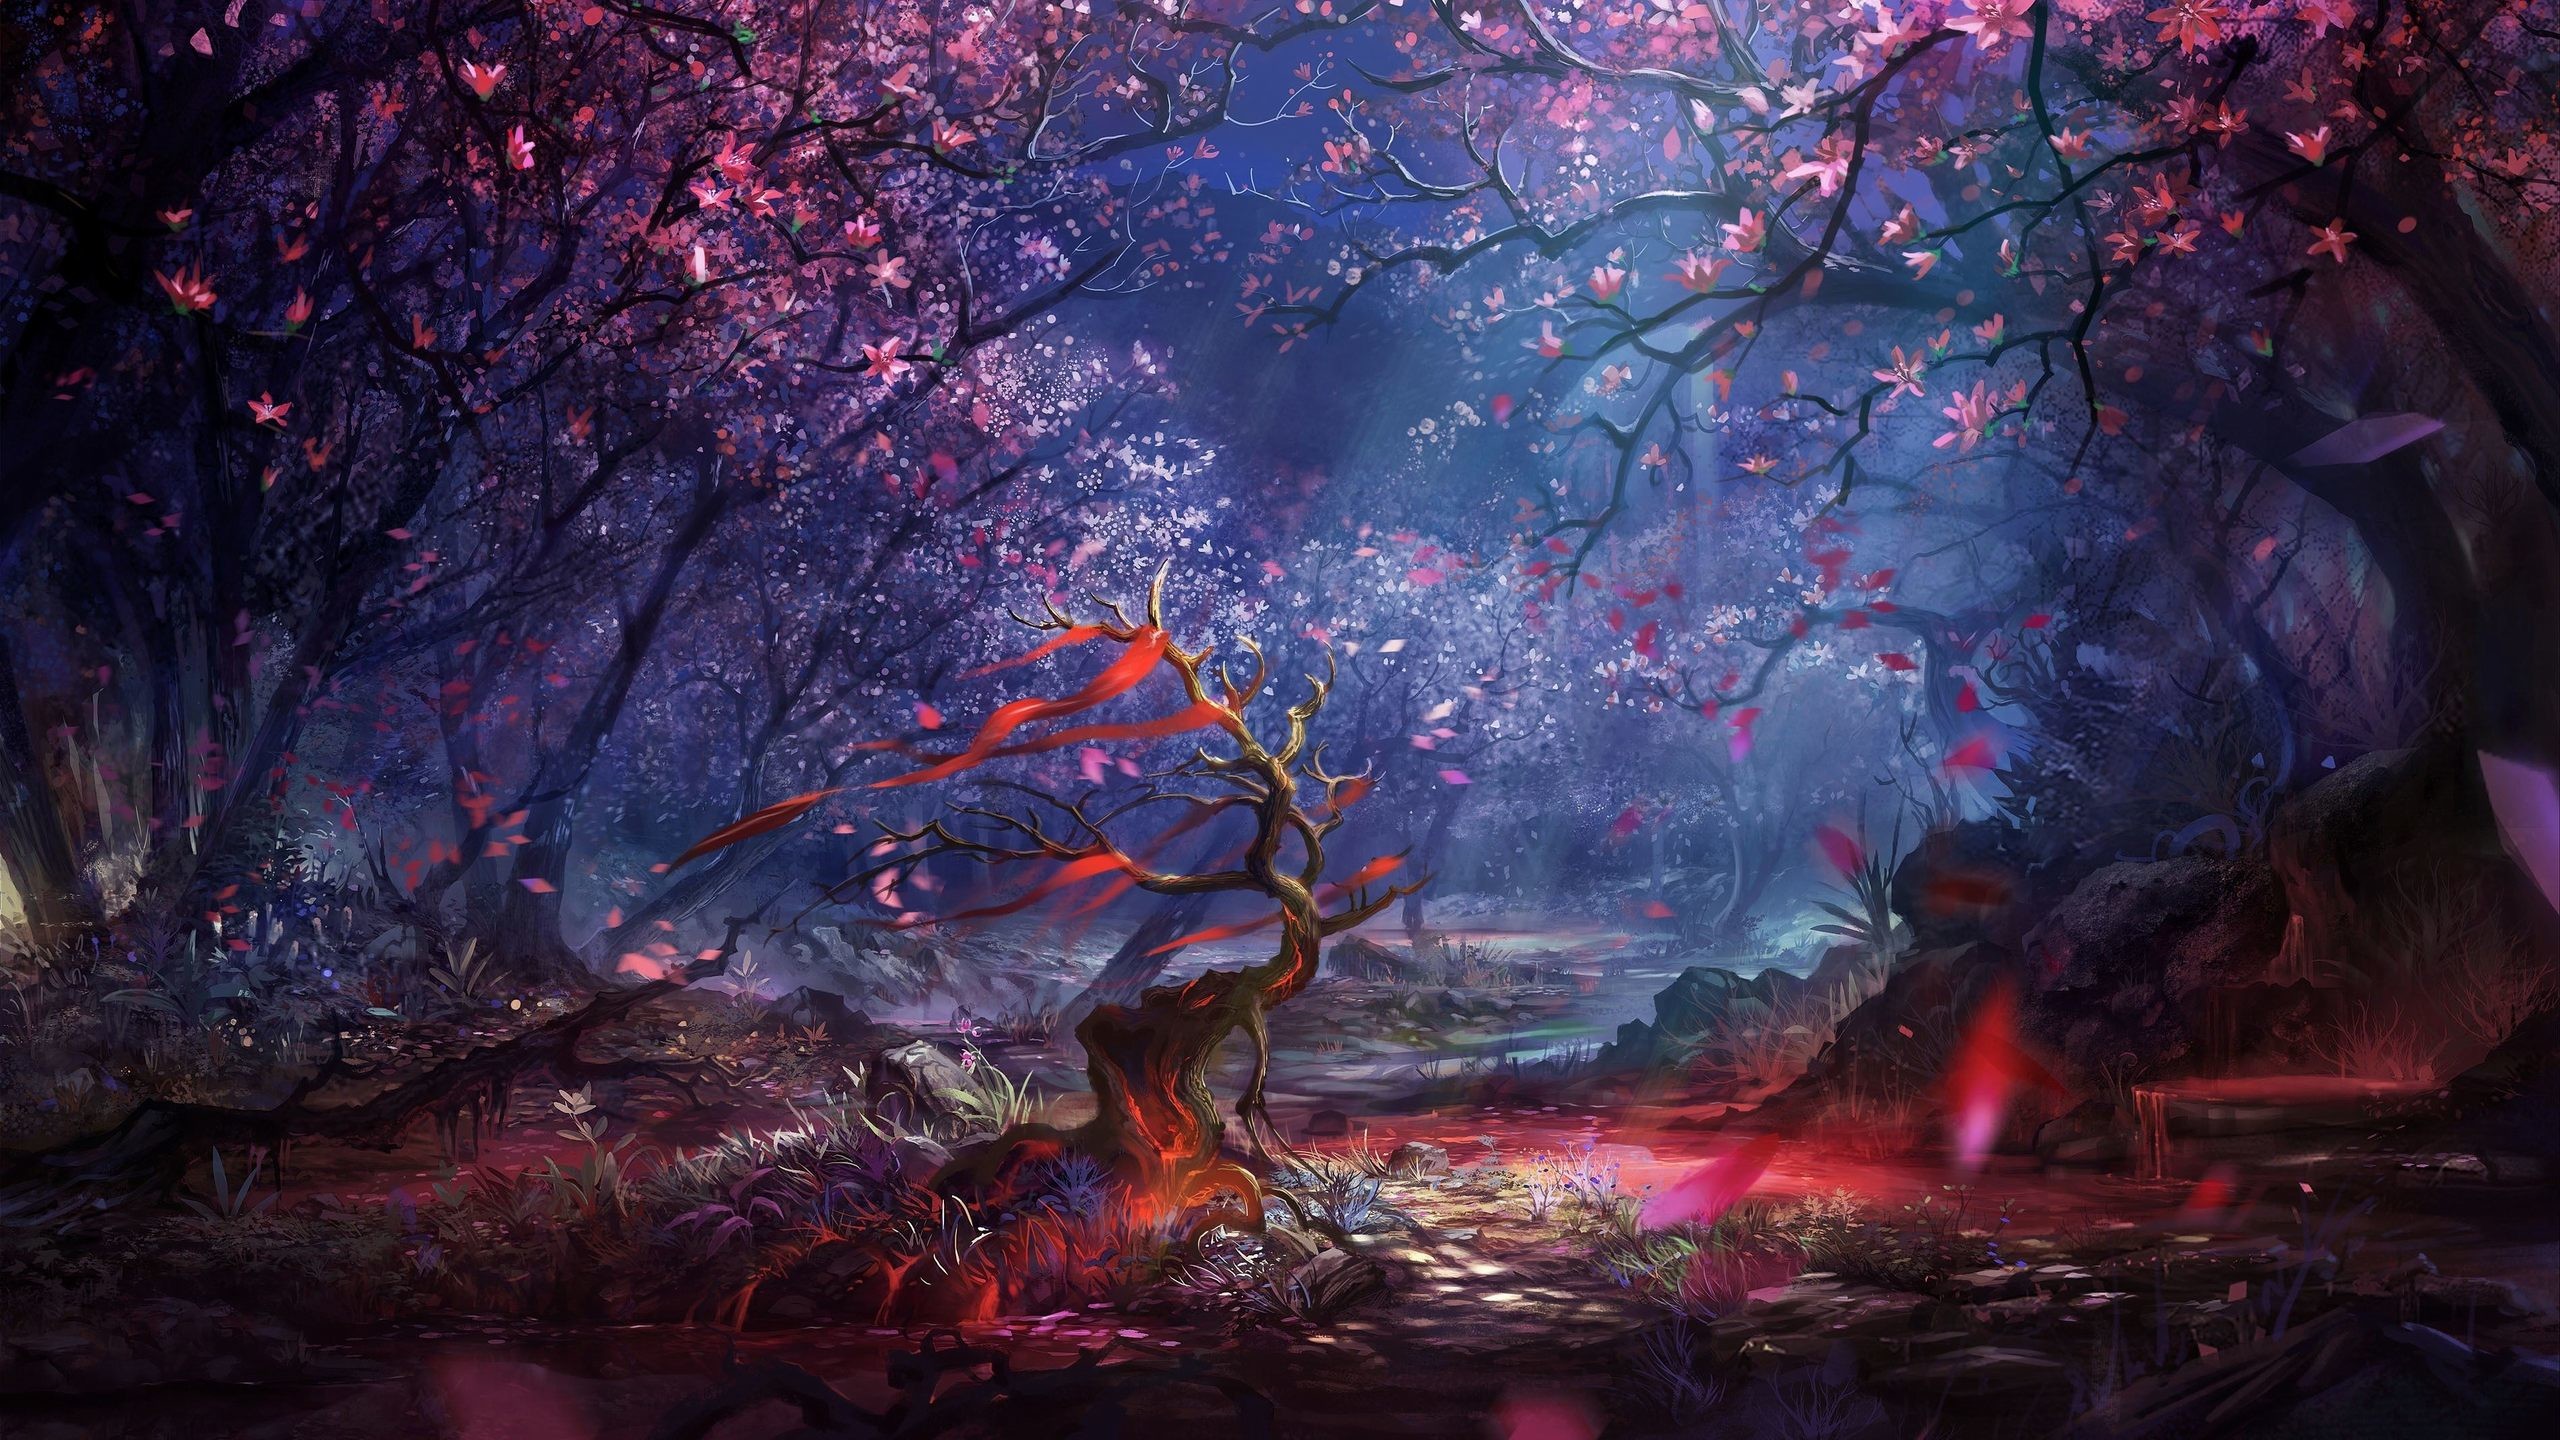 2560x1440 Fantasy Forest HD Wallpaper in high quality for desktop & mobile free  download. We have